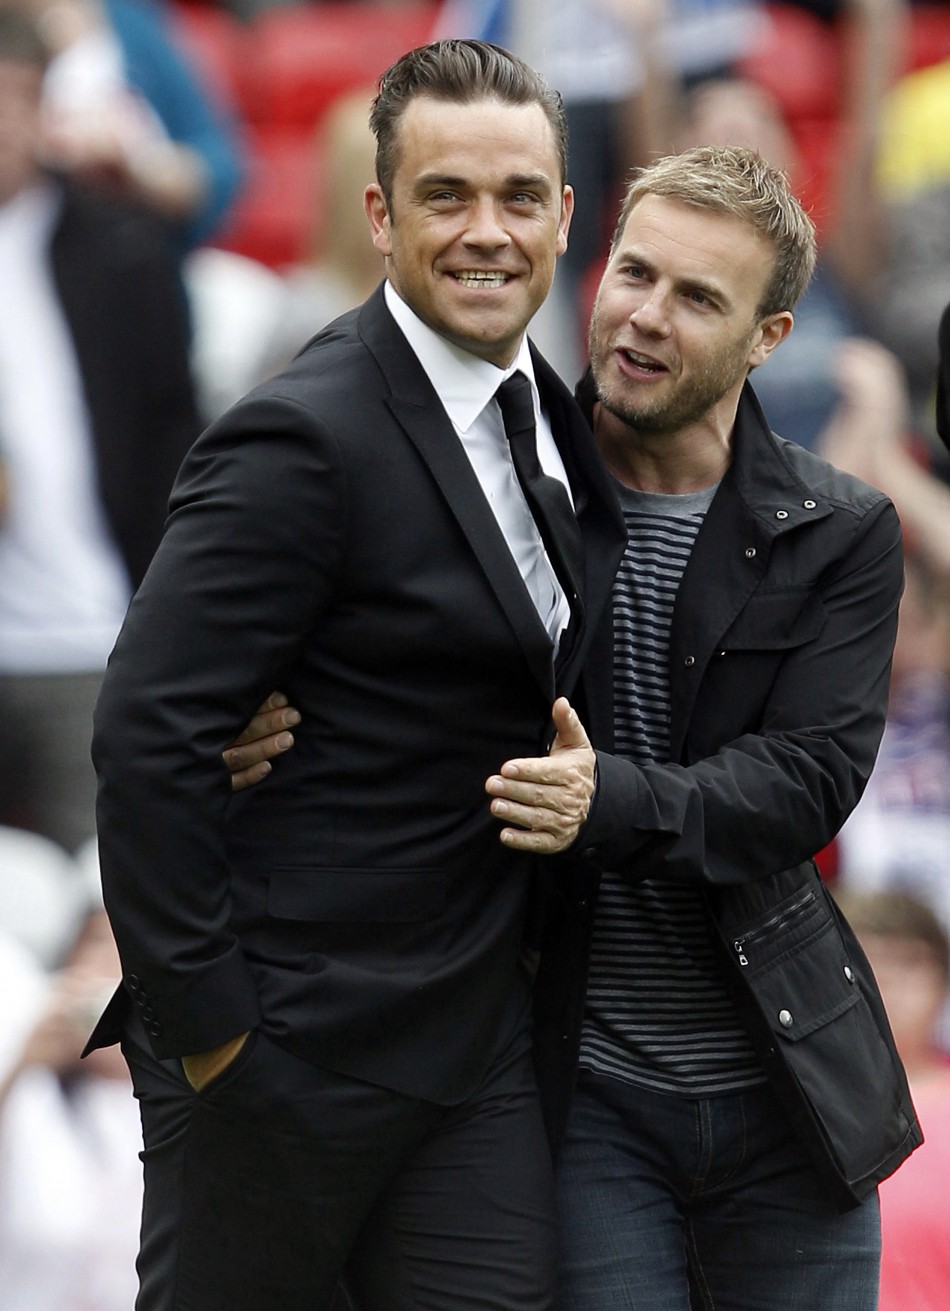 British singer Robbie Williams L walks onto the pitch with band mate Gary Barlow